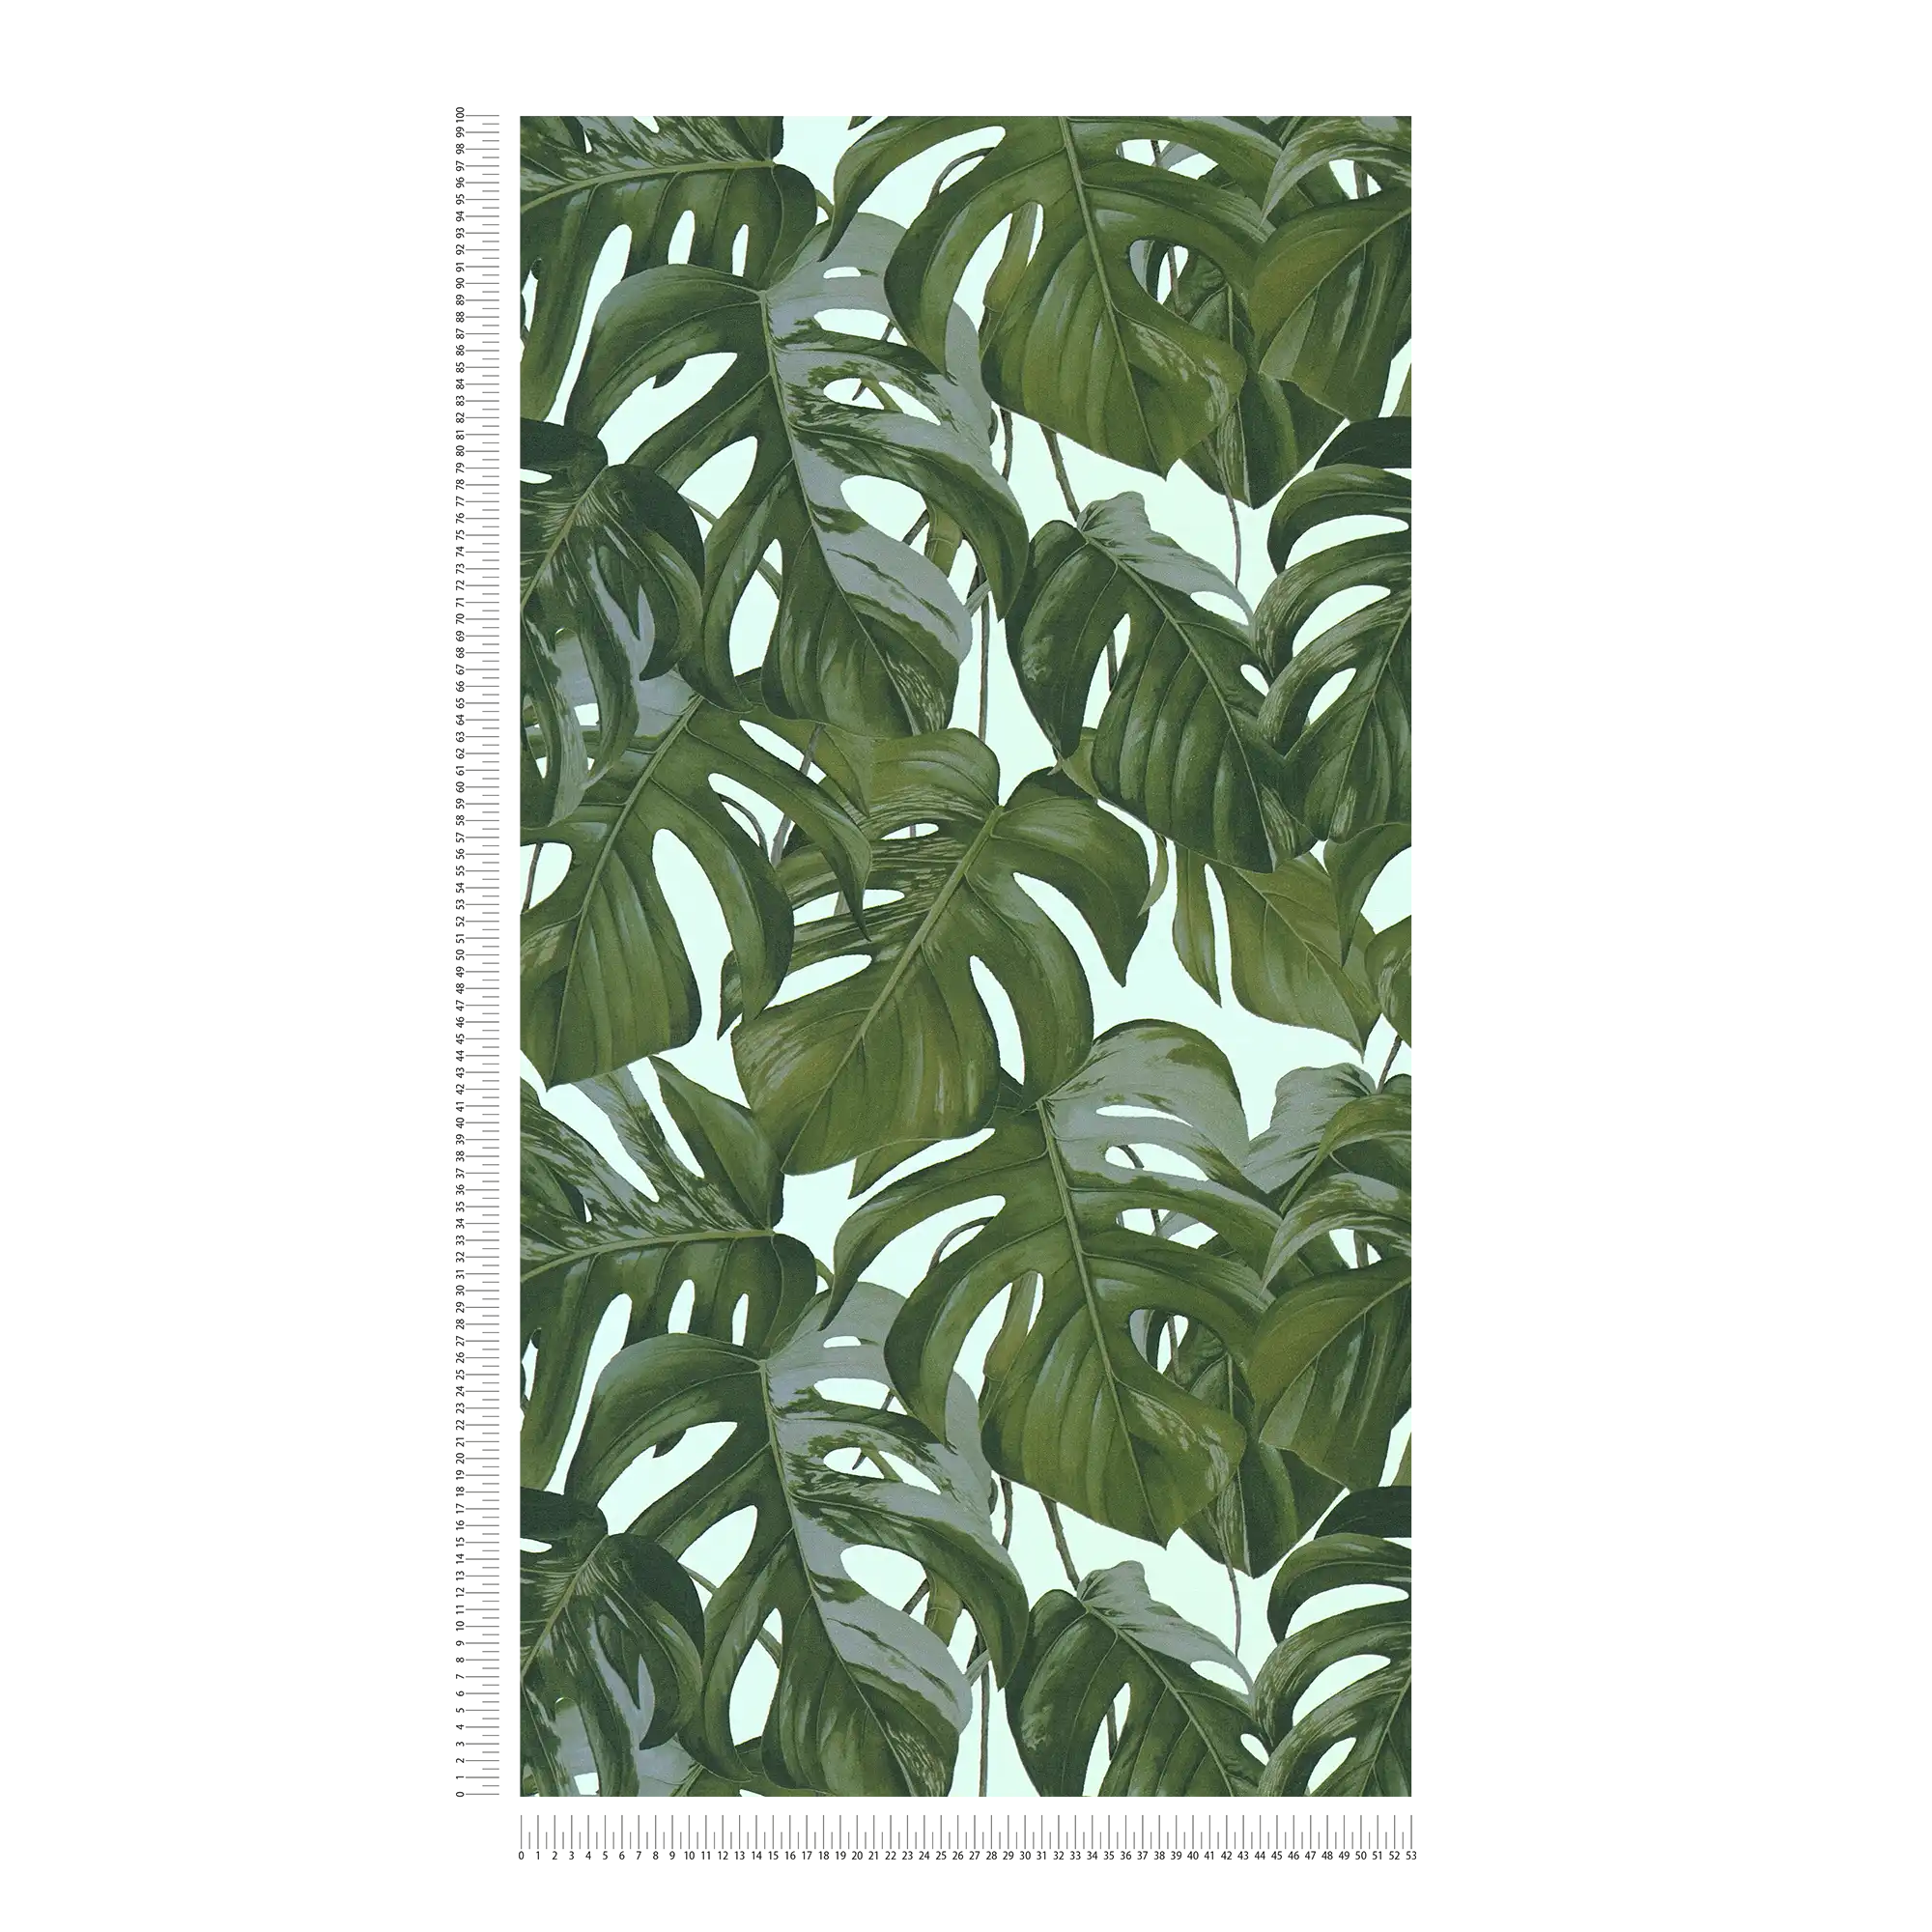             Leaves wallpaper with monstera pattern by MICHALSKY - green
        